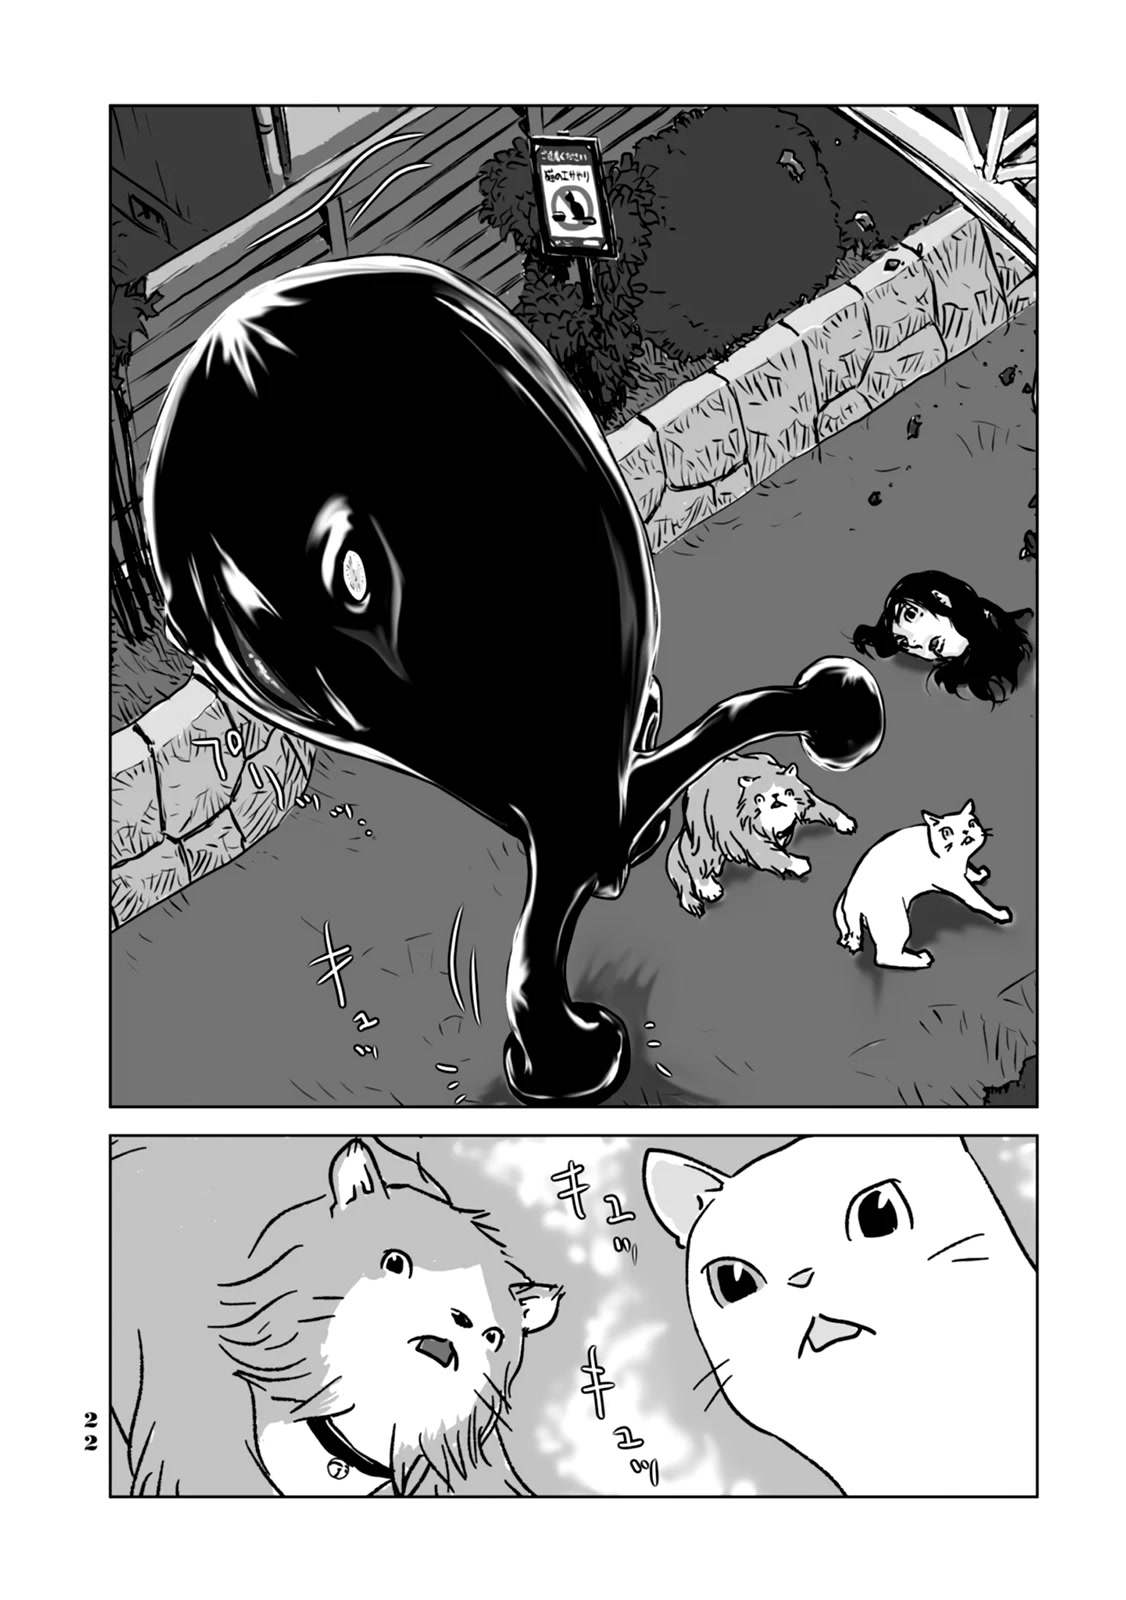 No Cats Were Harmed In This Comic. - Page 2